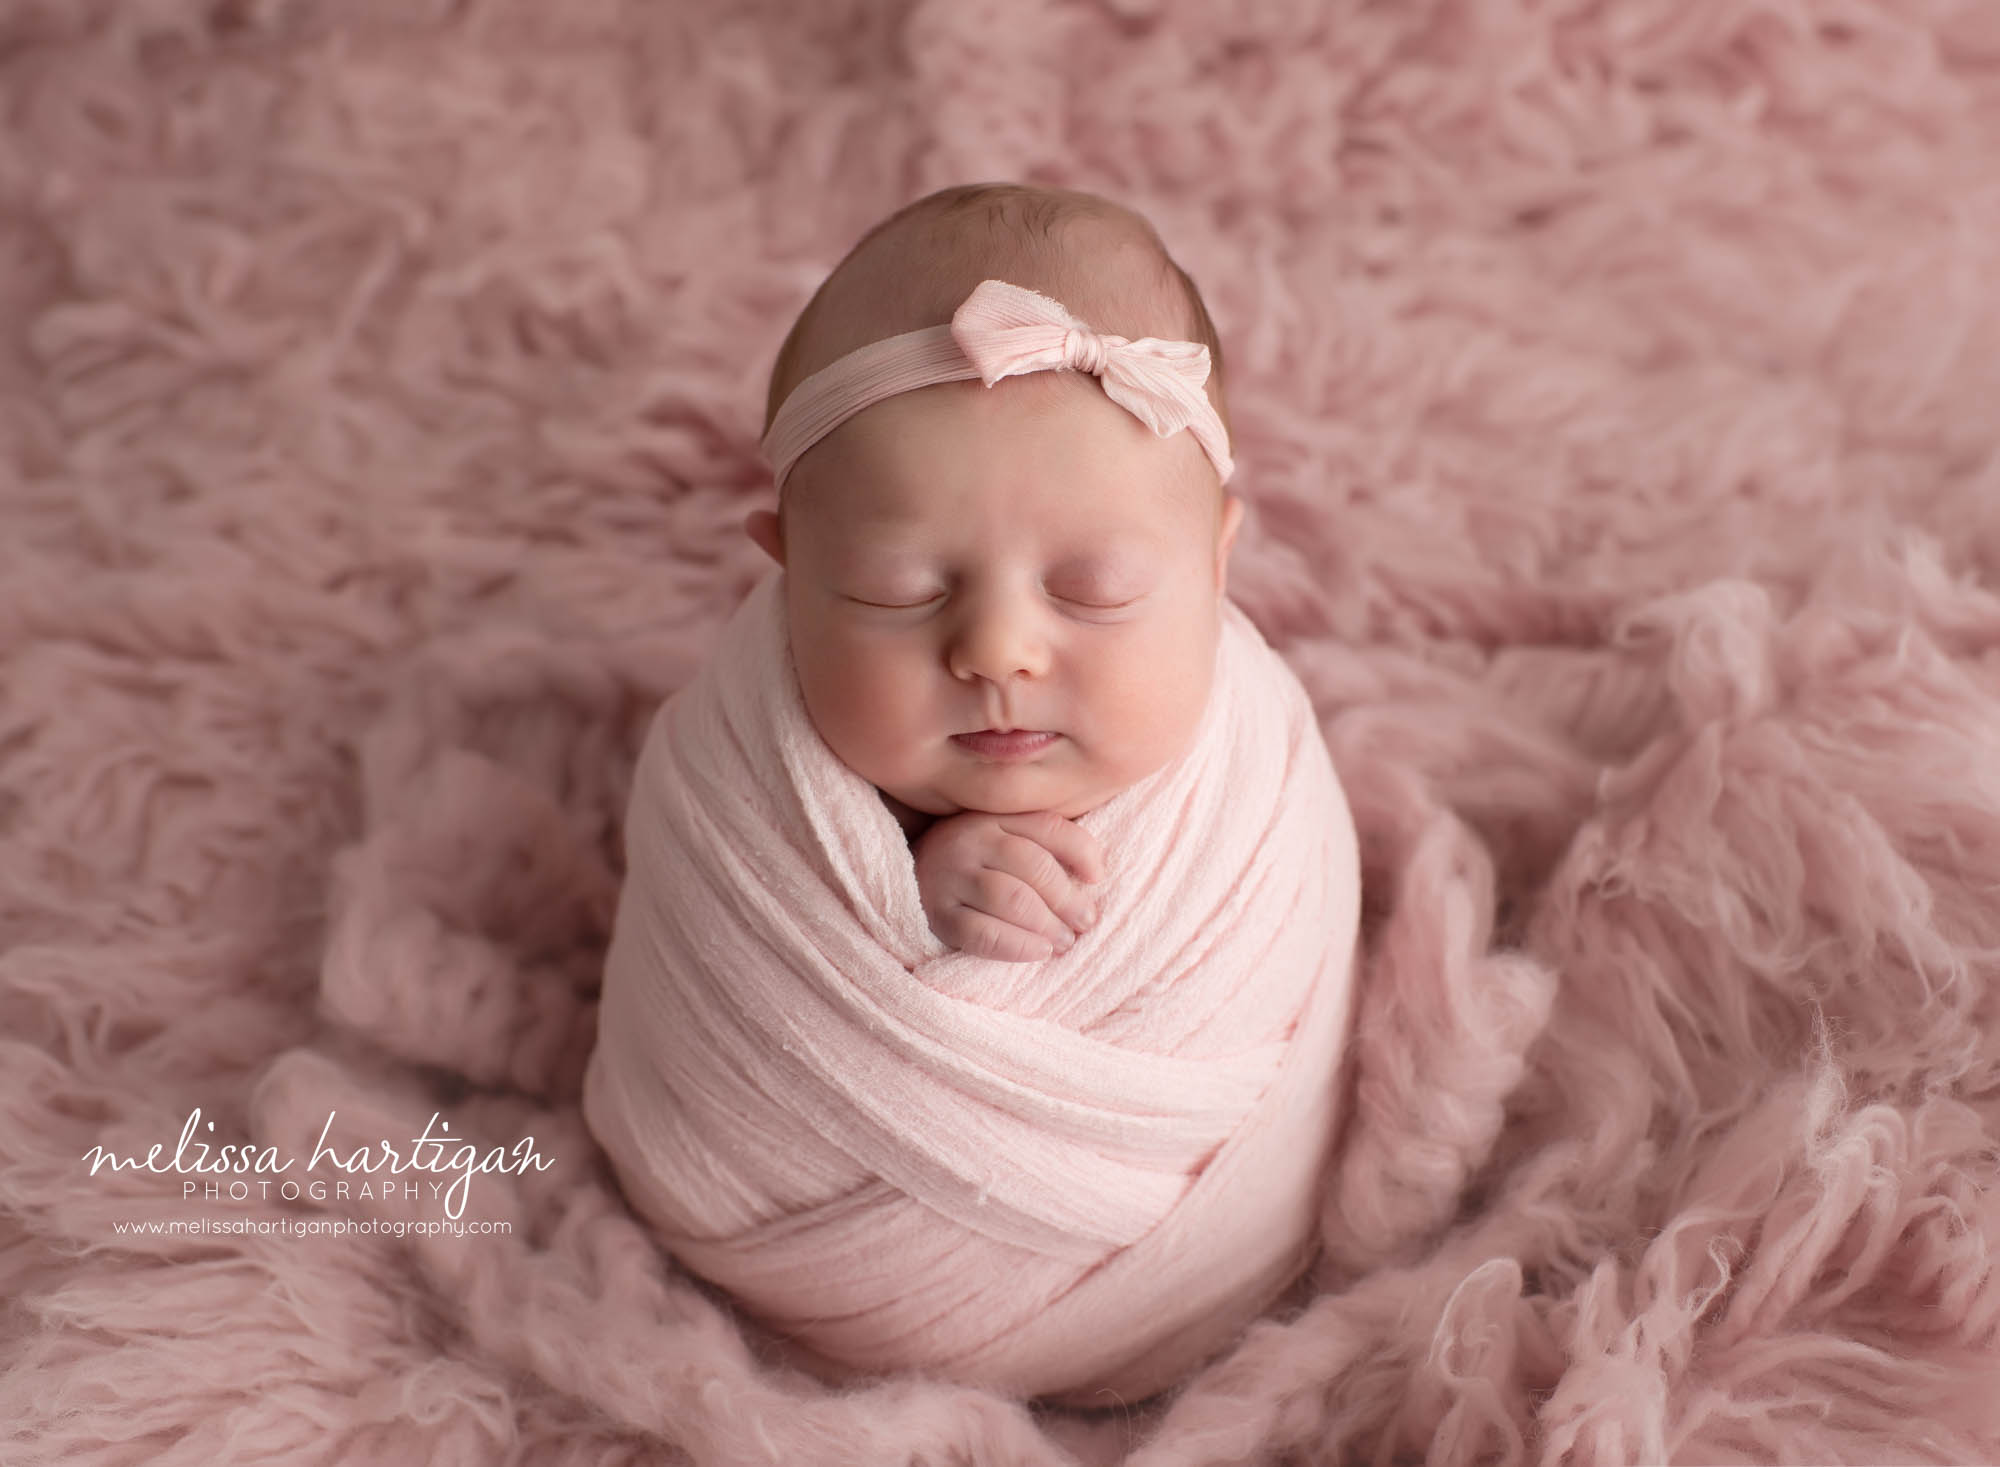 newborn baby girl wrappe din pink wrap with matching pink bow headband coventry ct newborn photography